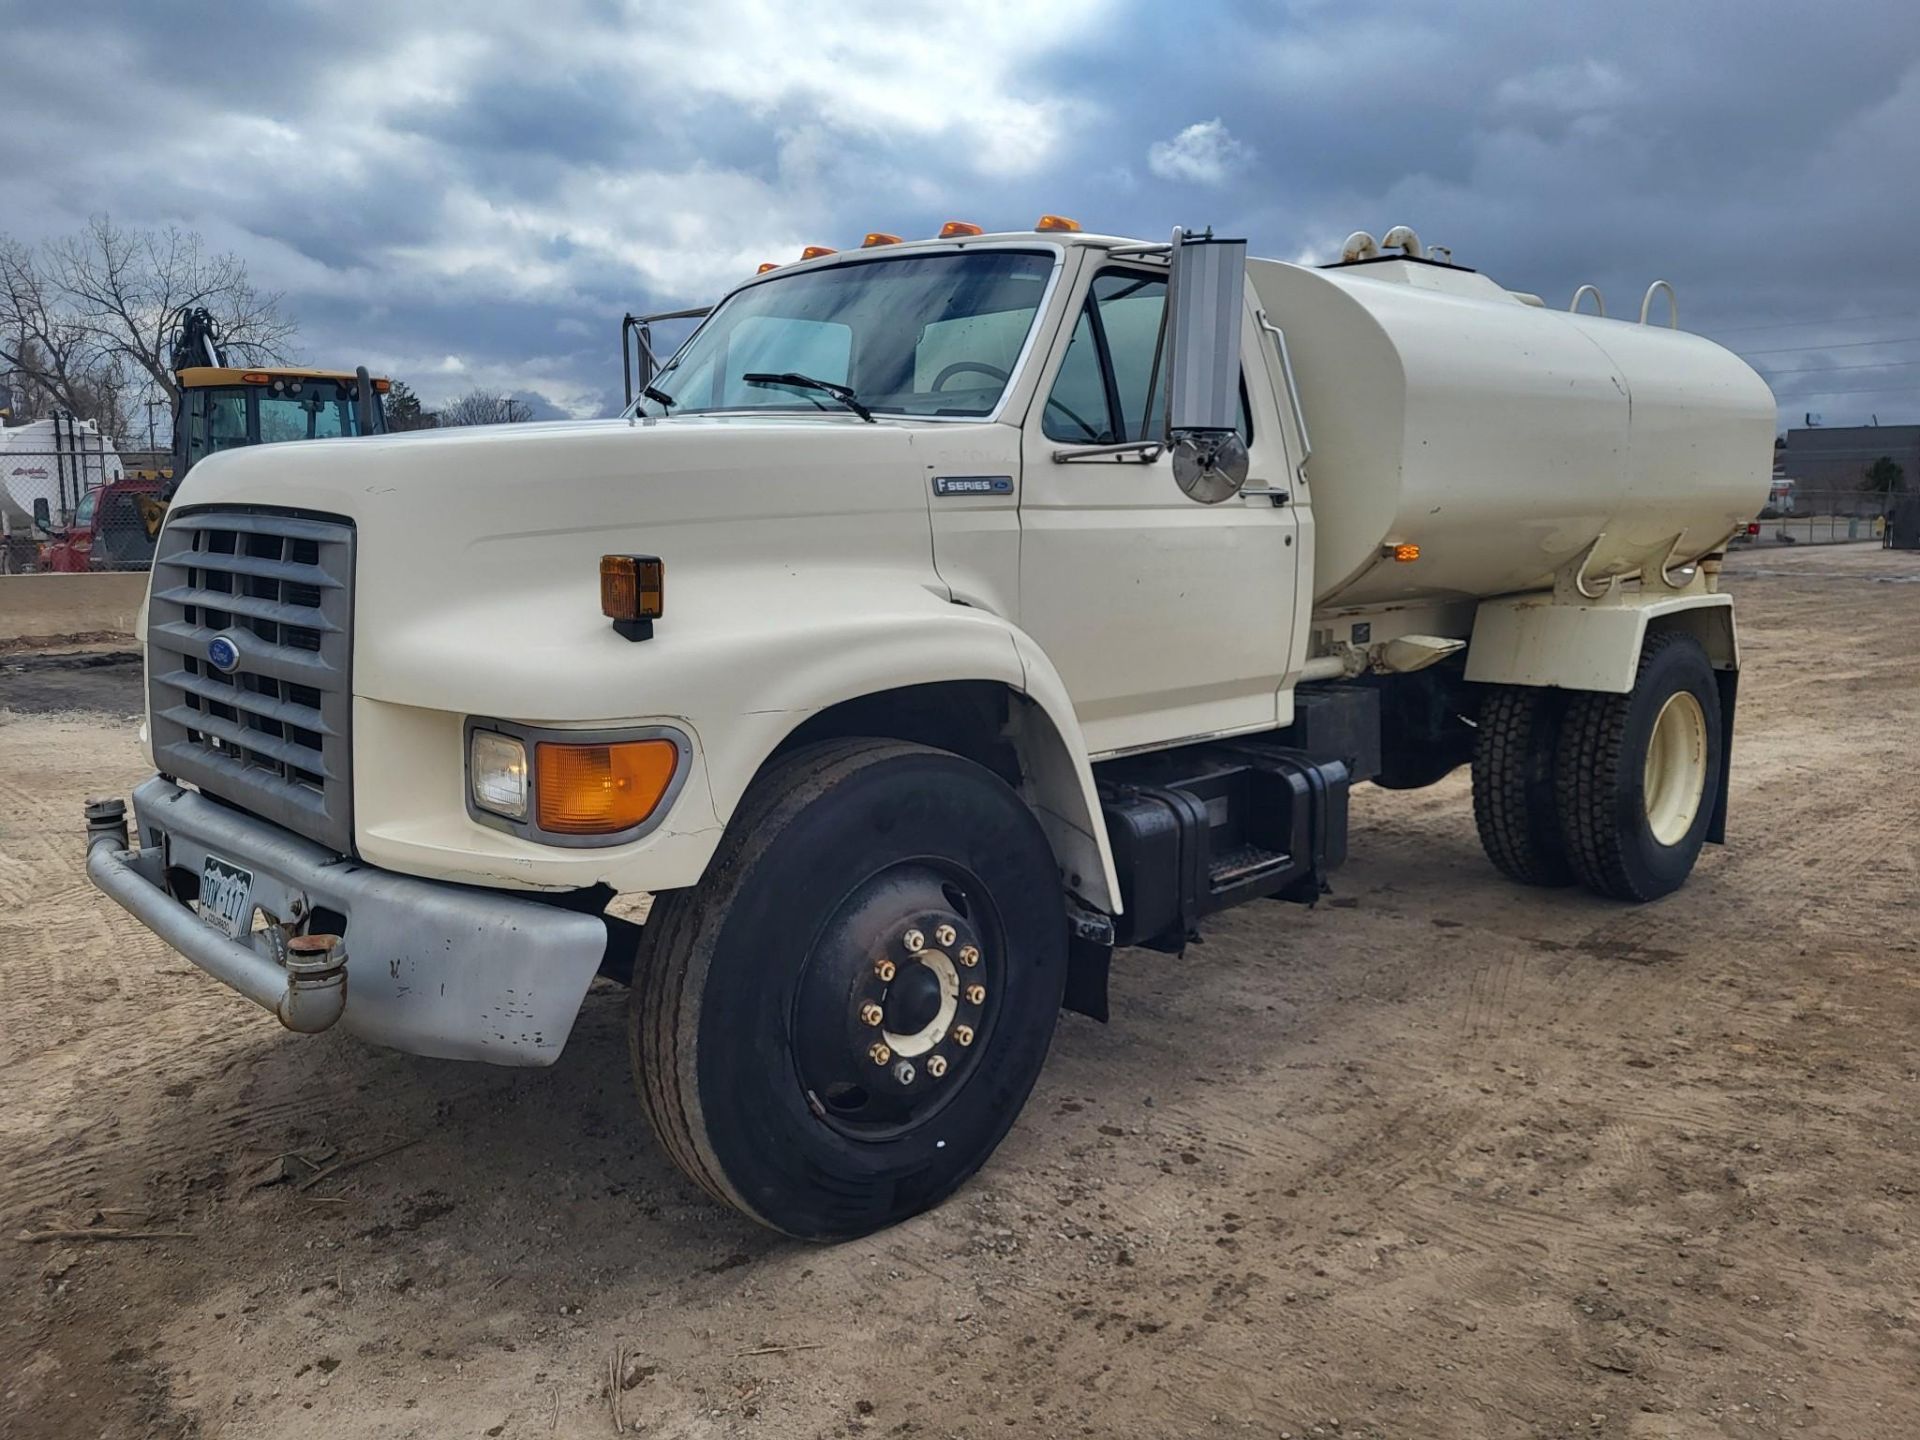 1995 FORD F800 WATER TRUCK - Image 9 of 20